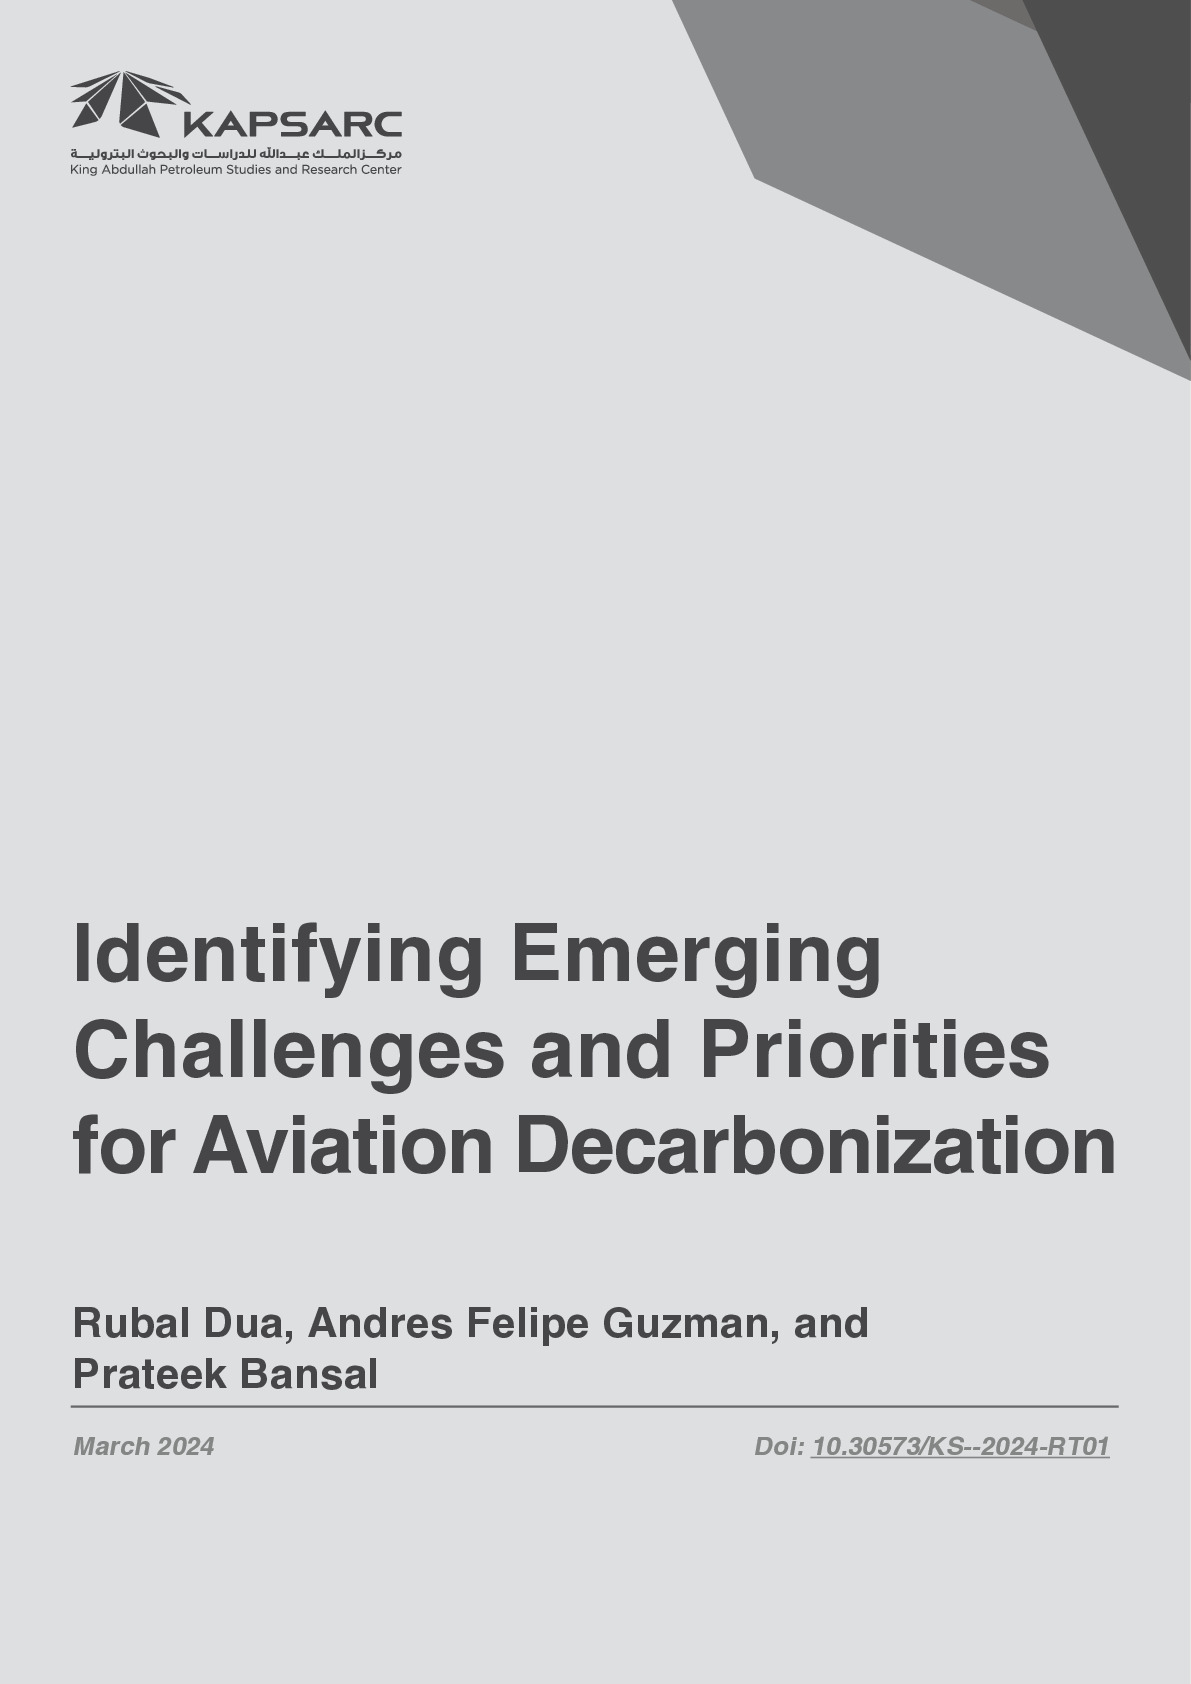 Identifying Emerging Challenges and Priorities for Aviation Decarbonization